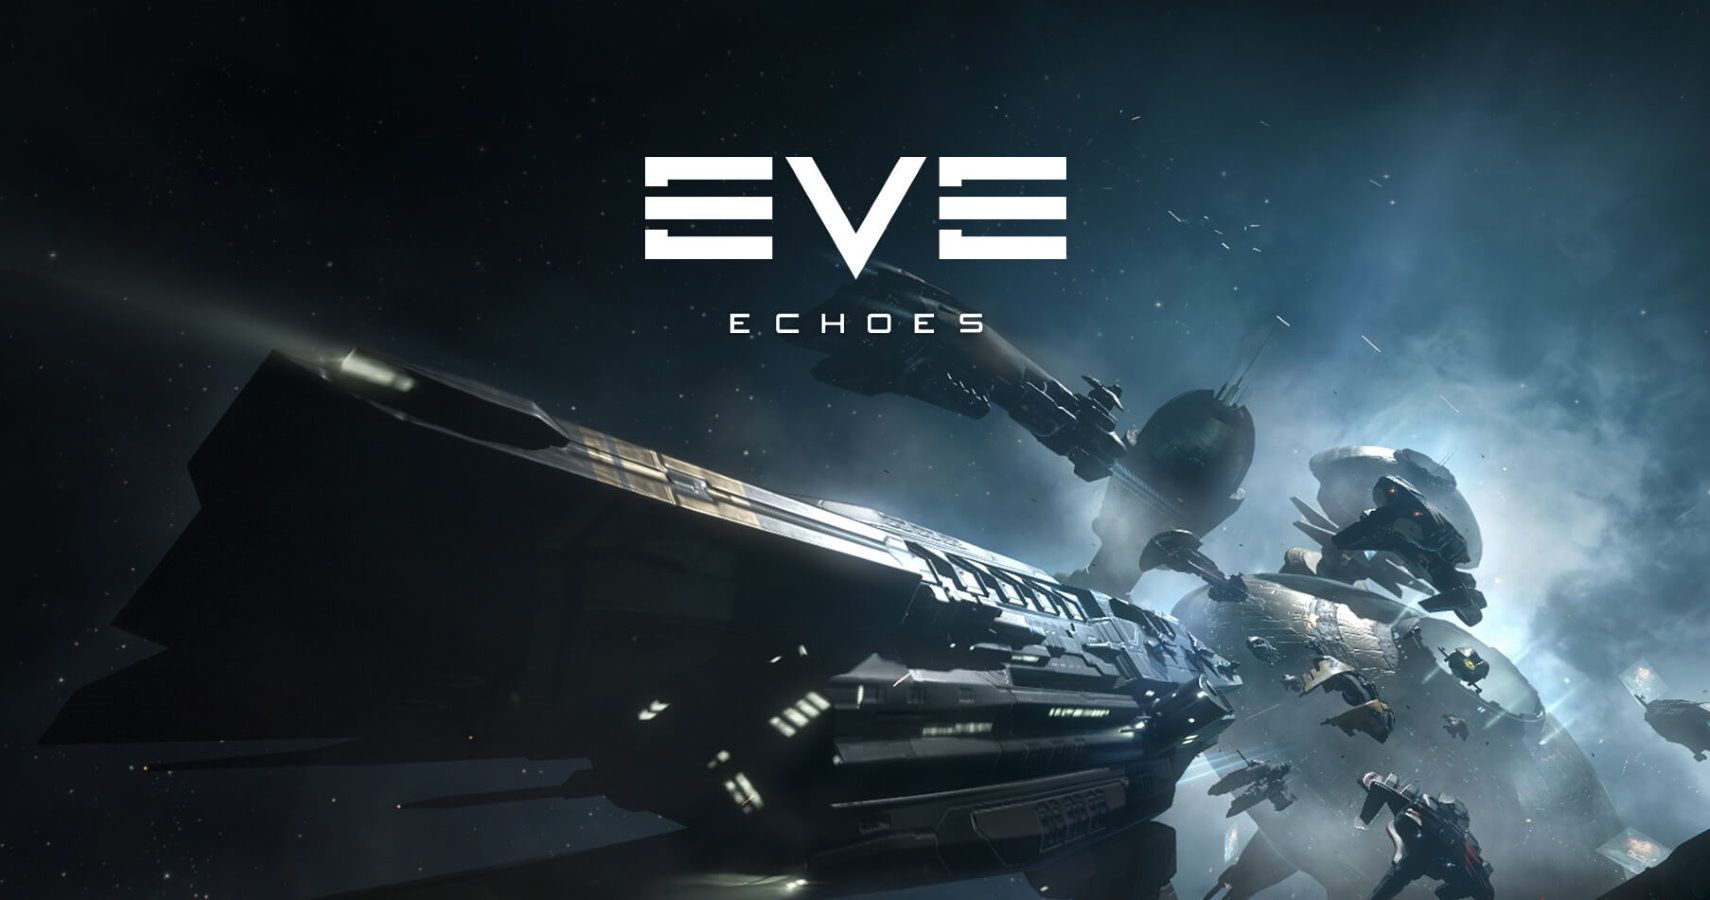 Eve Echoes, The Eve Online Mobile Game, Is Out Now